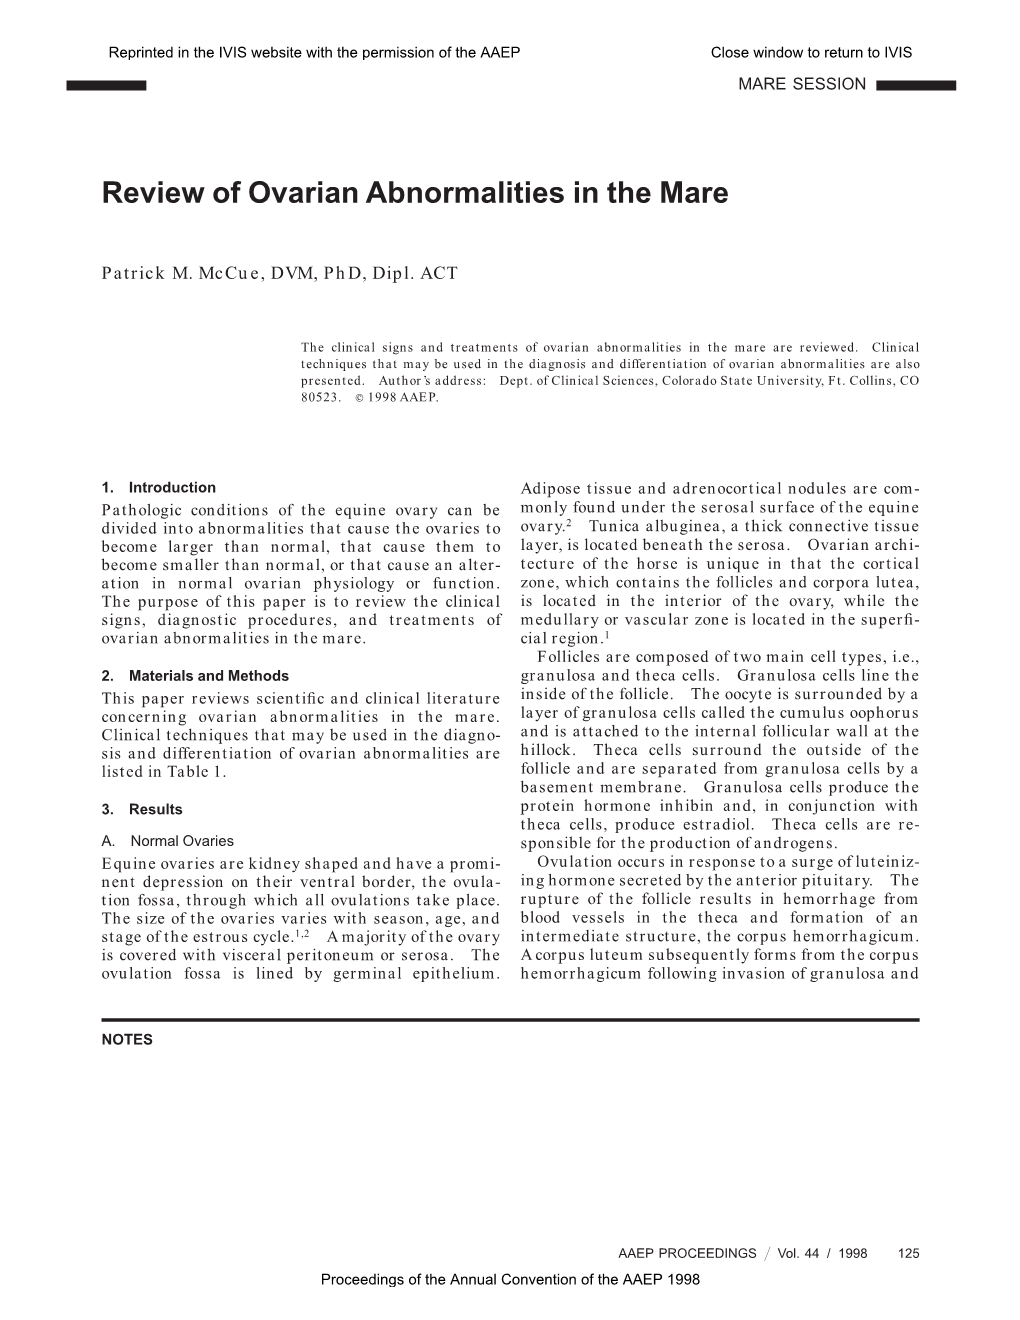 Review of Ovarian Abnormalities in the Mare